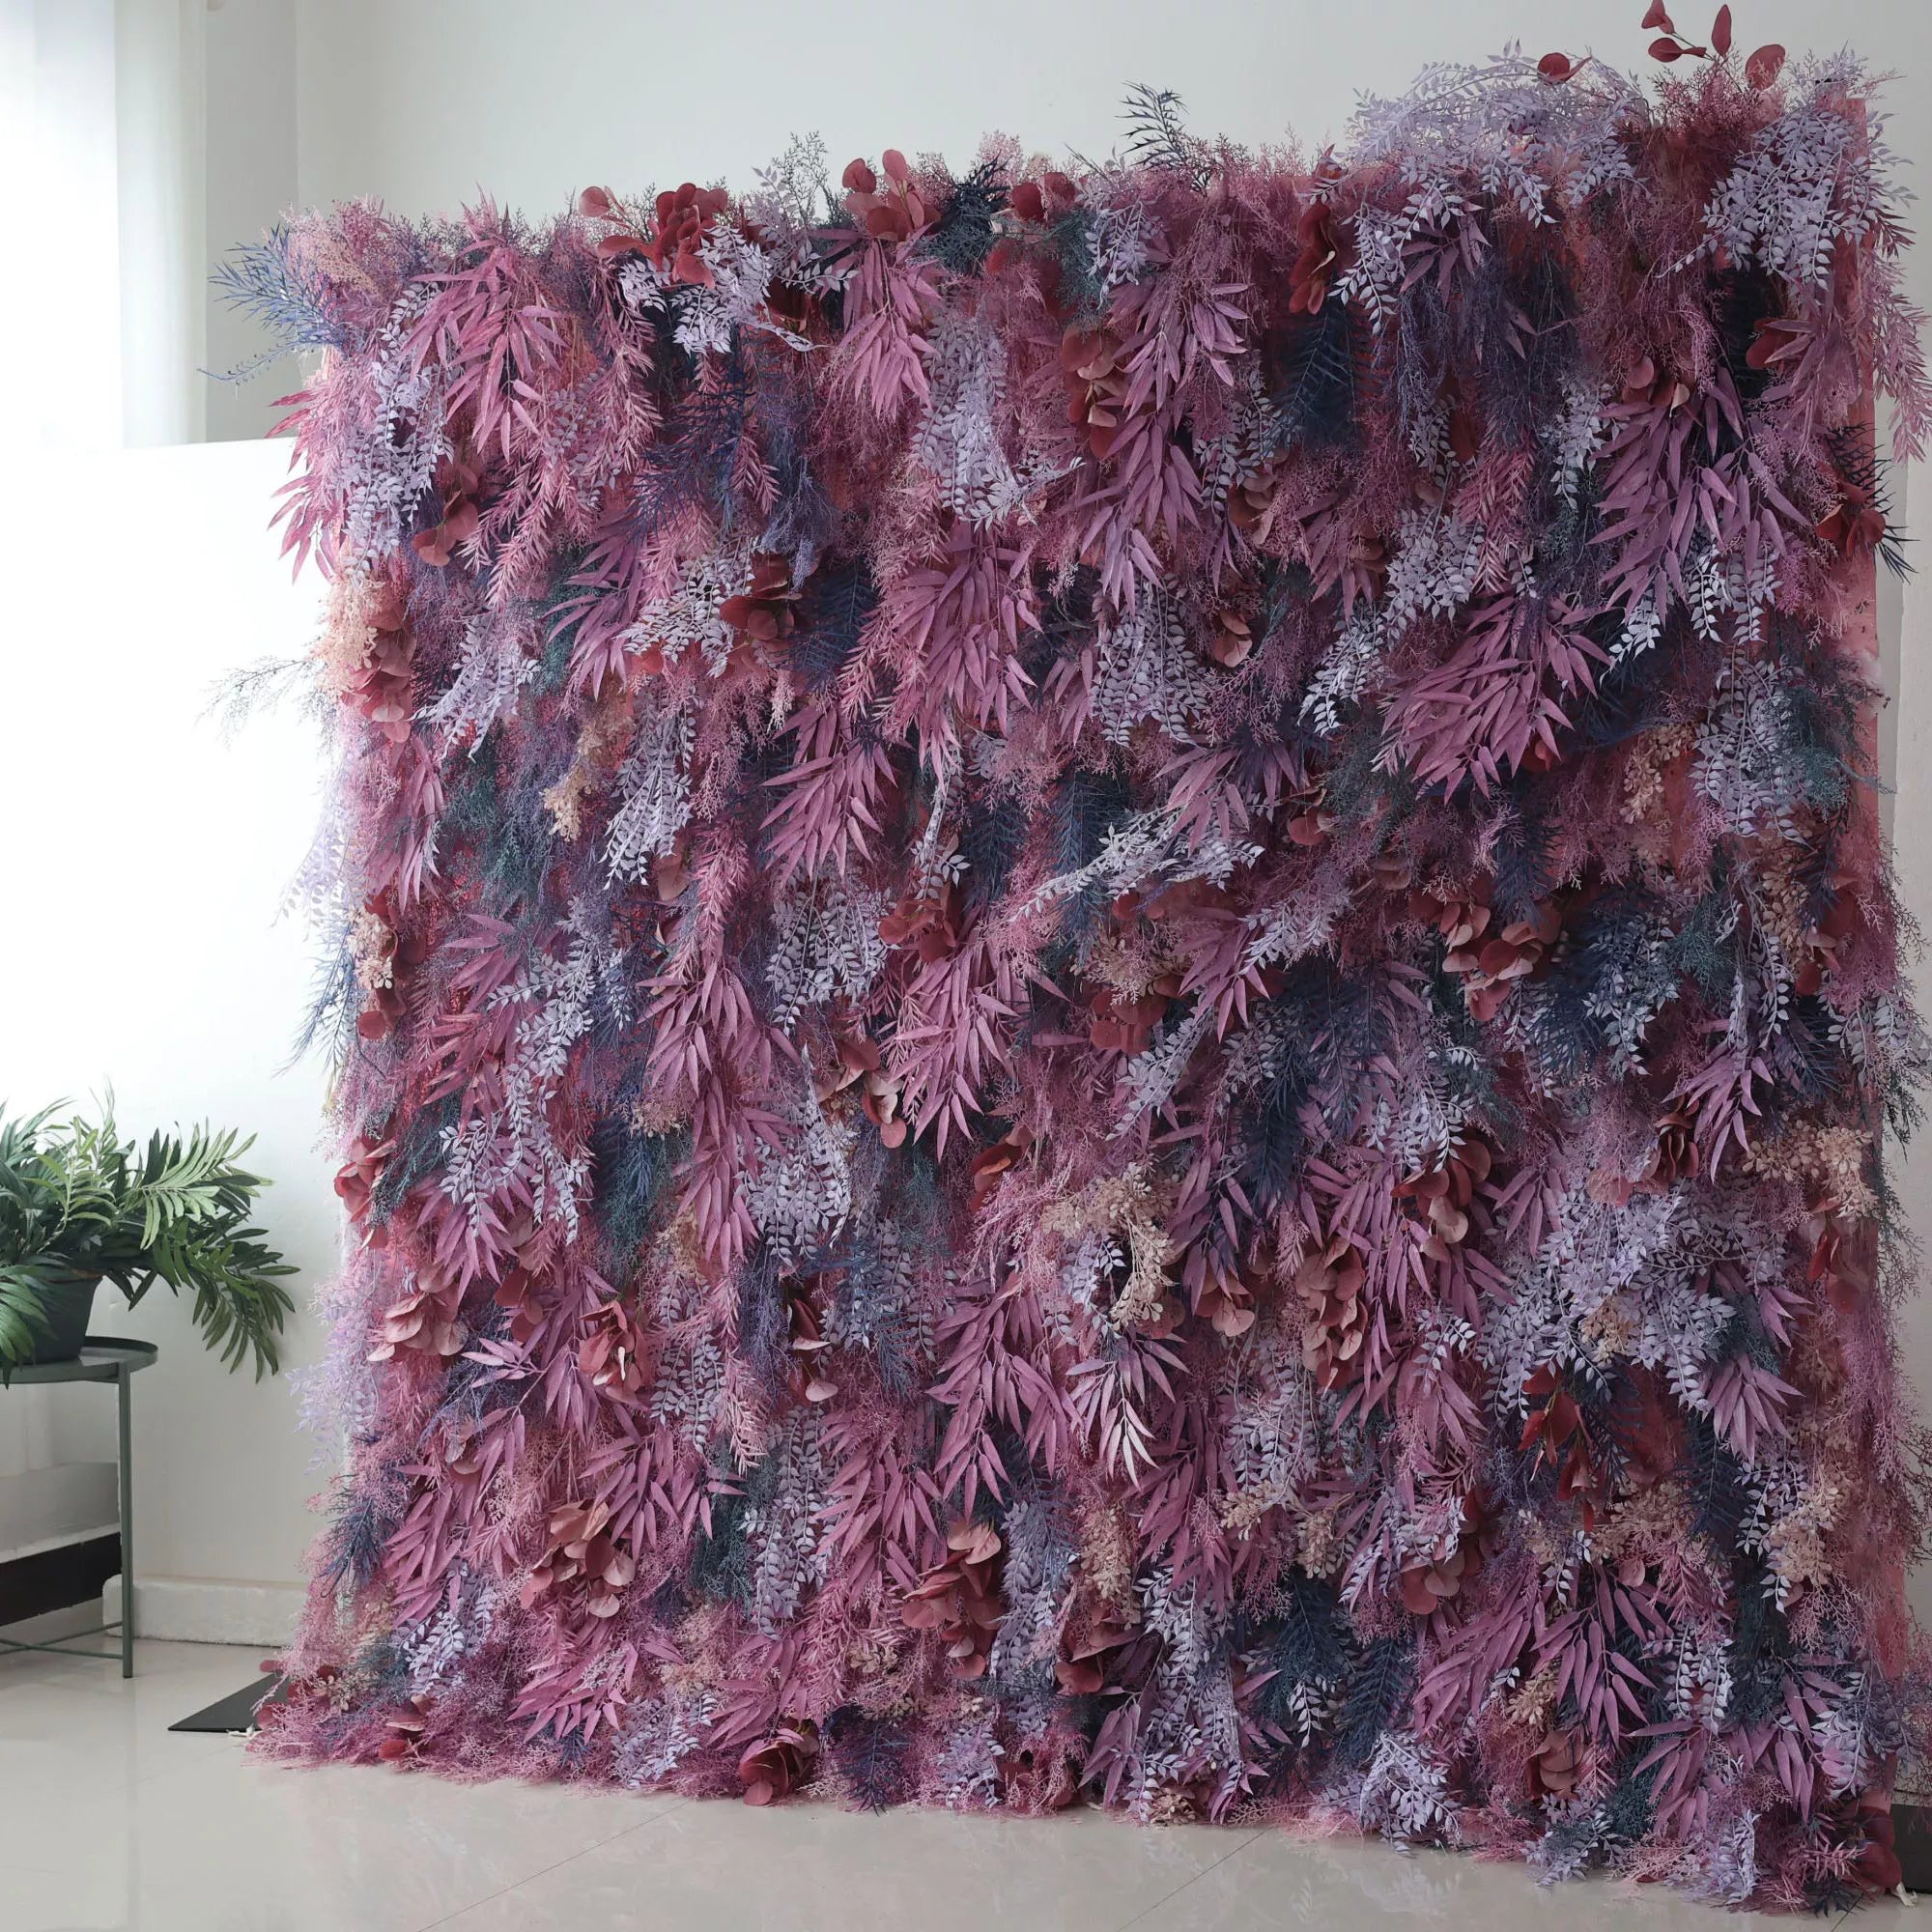 ValarFlowers Backdrop: Embrace the enchantment of Mystic Foliage, blending plum and lavender ferns. A twilight tapestry that transforms events into magical memories.